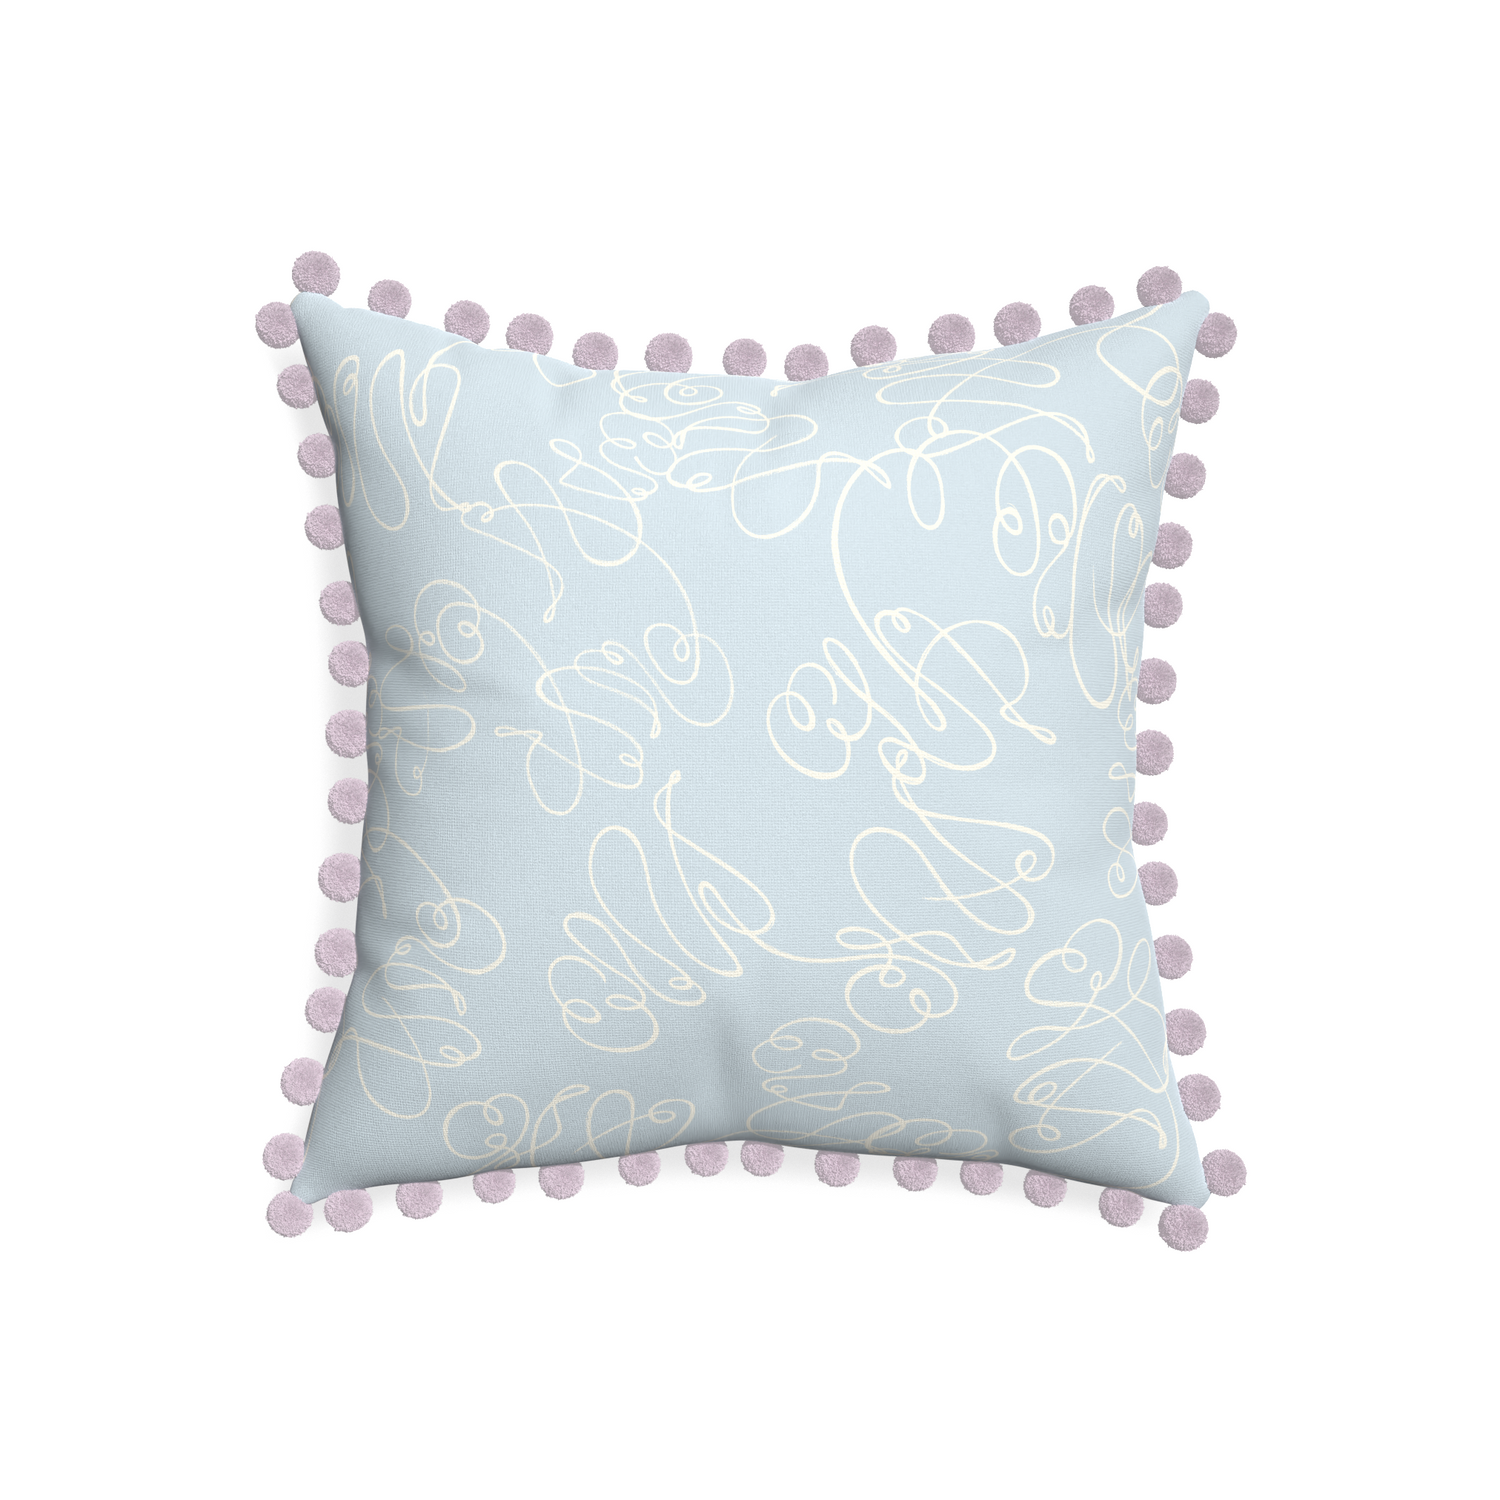 20-square mirabella custom powder blue abstractpillow with l on white background